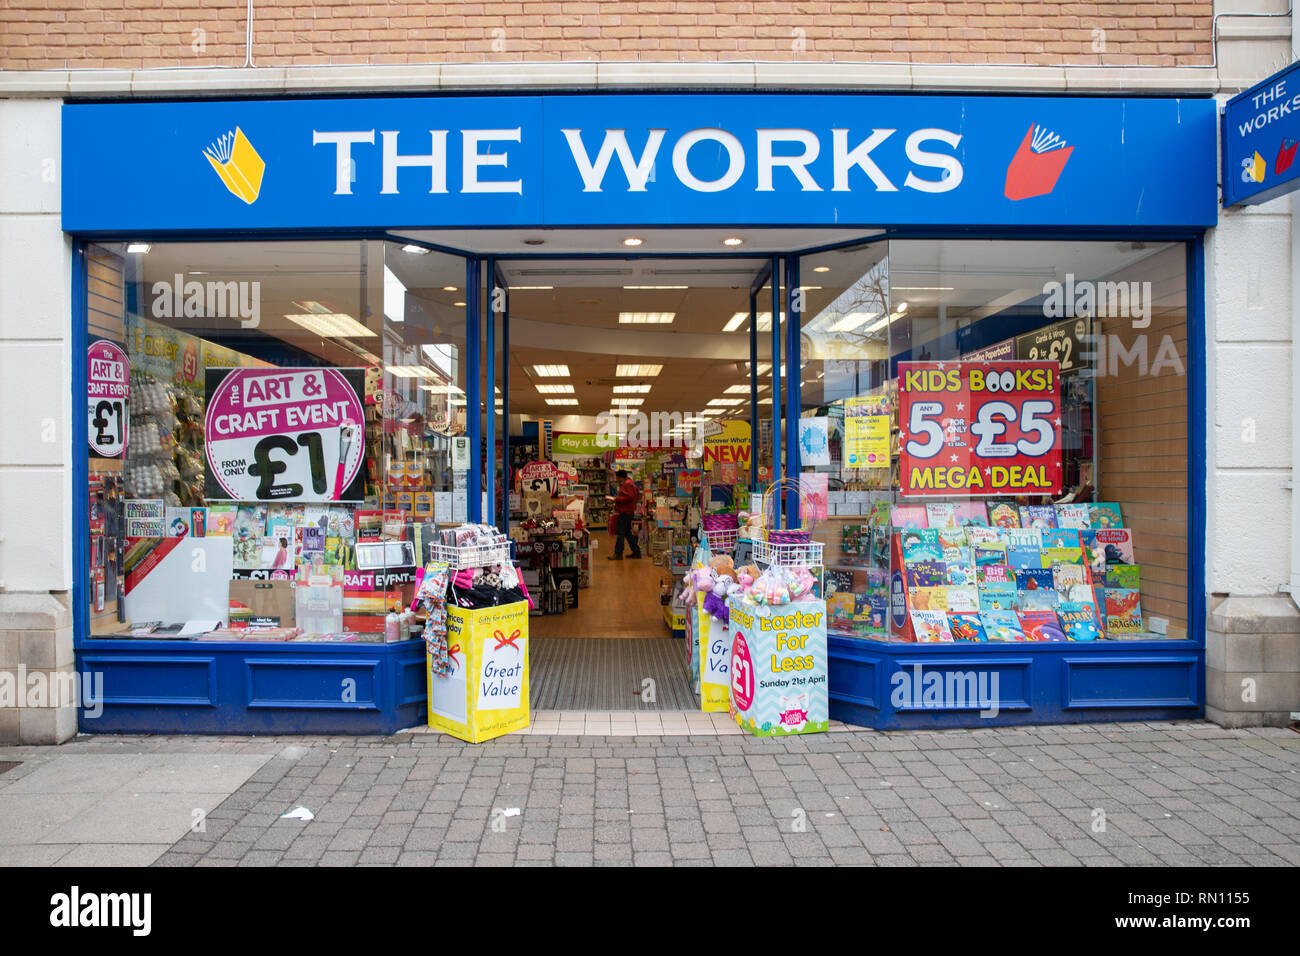 The Works, stationery shop in Merlin's Walk, Carmarthen, South Wales, Selling books, tyos, art and craft good for children and adults Stock Photo